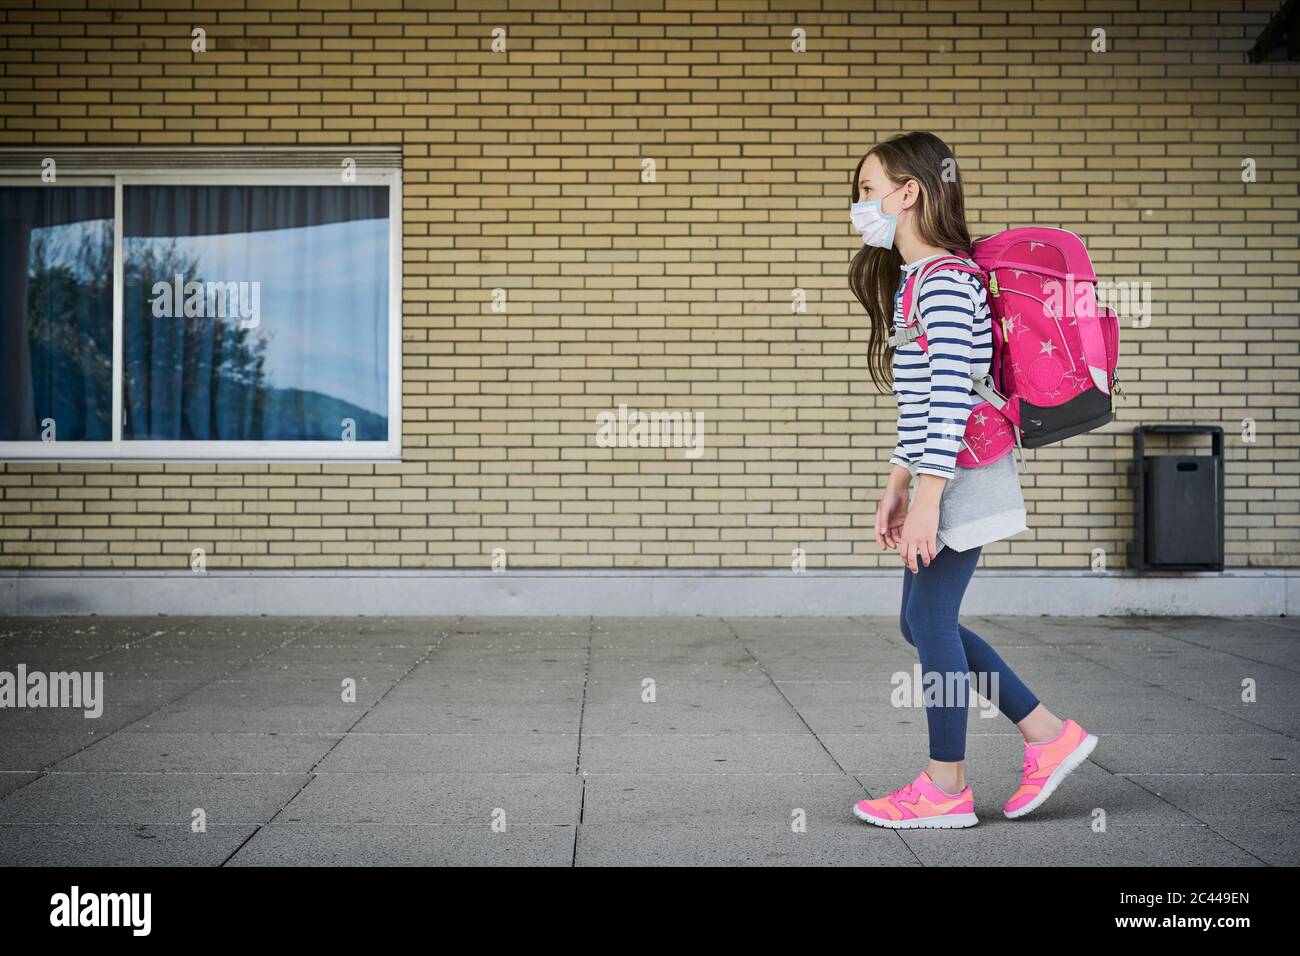 Girl wearing mask and schoolbag walking along building Stock Photo